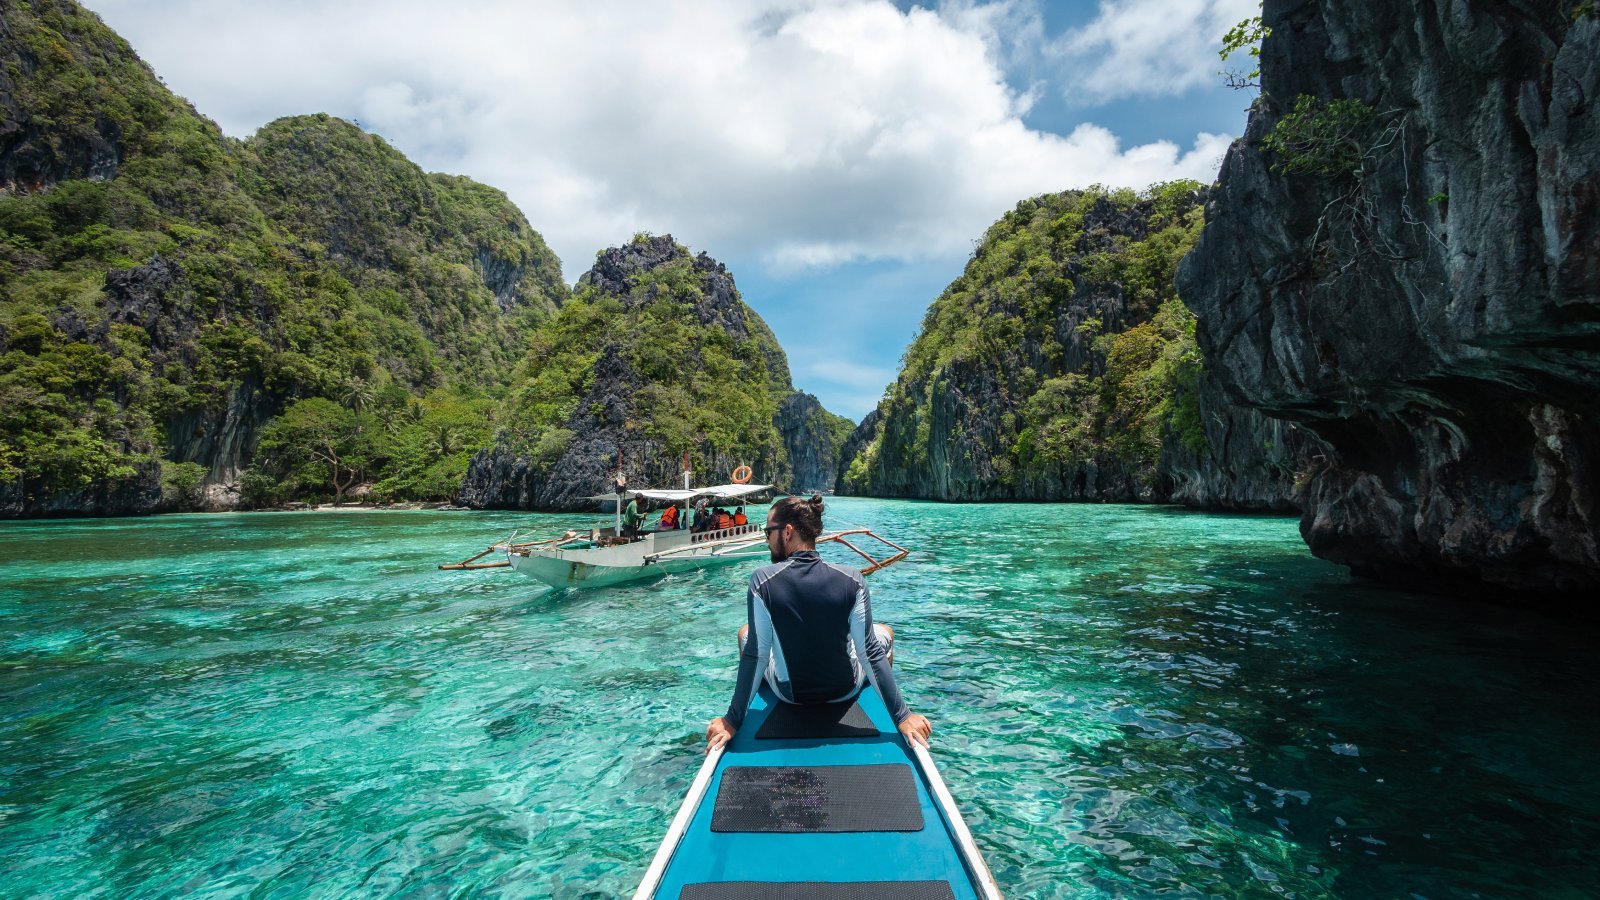 <p class="wp-caption-text">Image Credit: Shutterstock / R.M. Nunes</p>  <p><span>Palawan, an archipelagic province in the Philippines, is a haven of biodiversity, with lush jungles, towering limestone cliffs, and pristine beaches. Recognized for its commitment to eco-tourism, Palawan offers a range of sustainable travel experiences, from community-based tours to eco-friendly accommodations nestled in nature.</span></p>